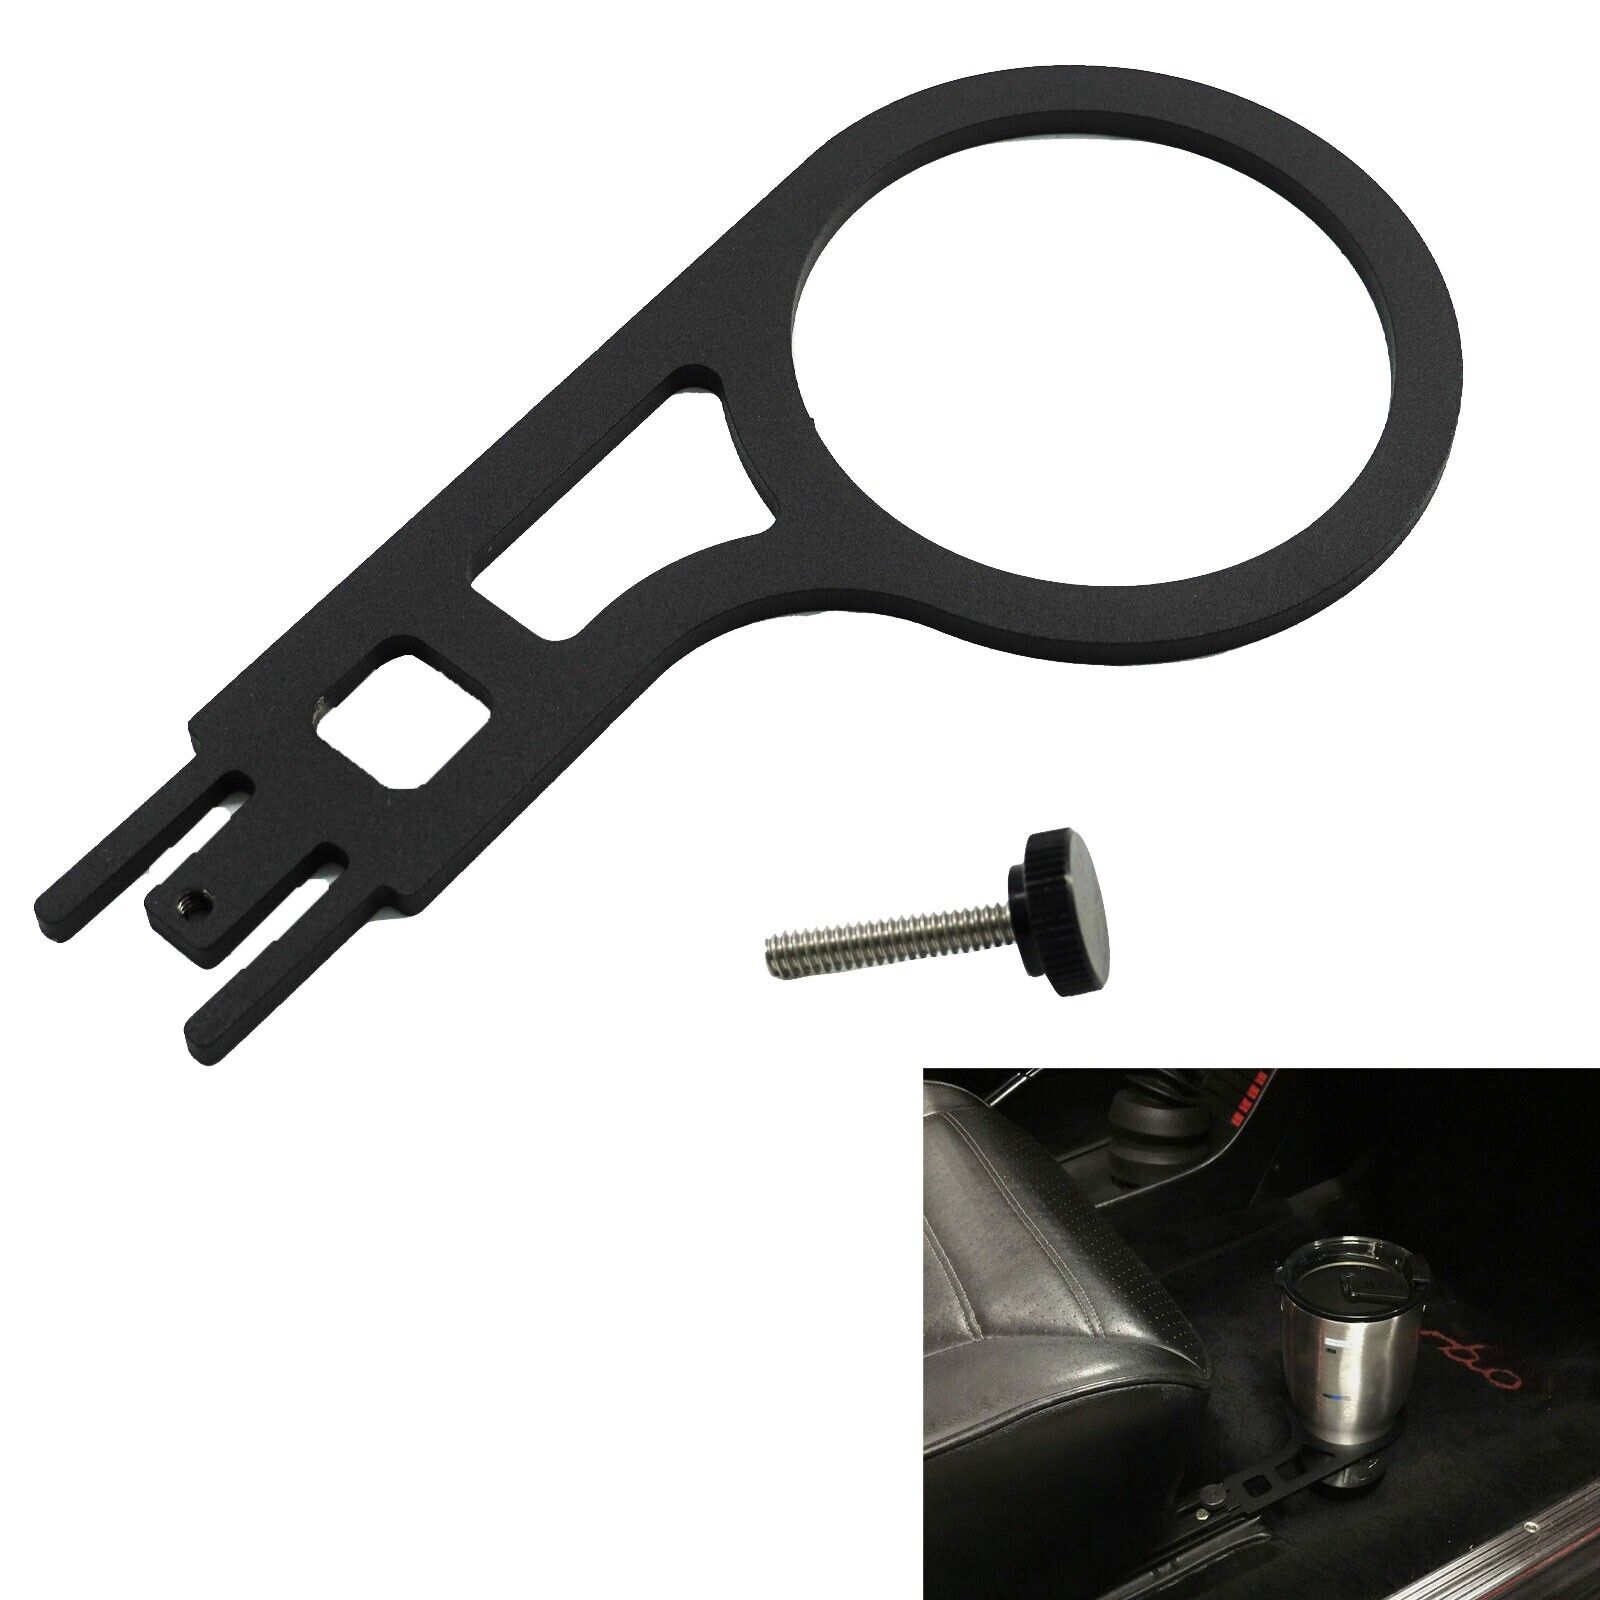 Cup Holder For Porsche 911 Fits 68 to 98